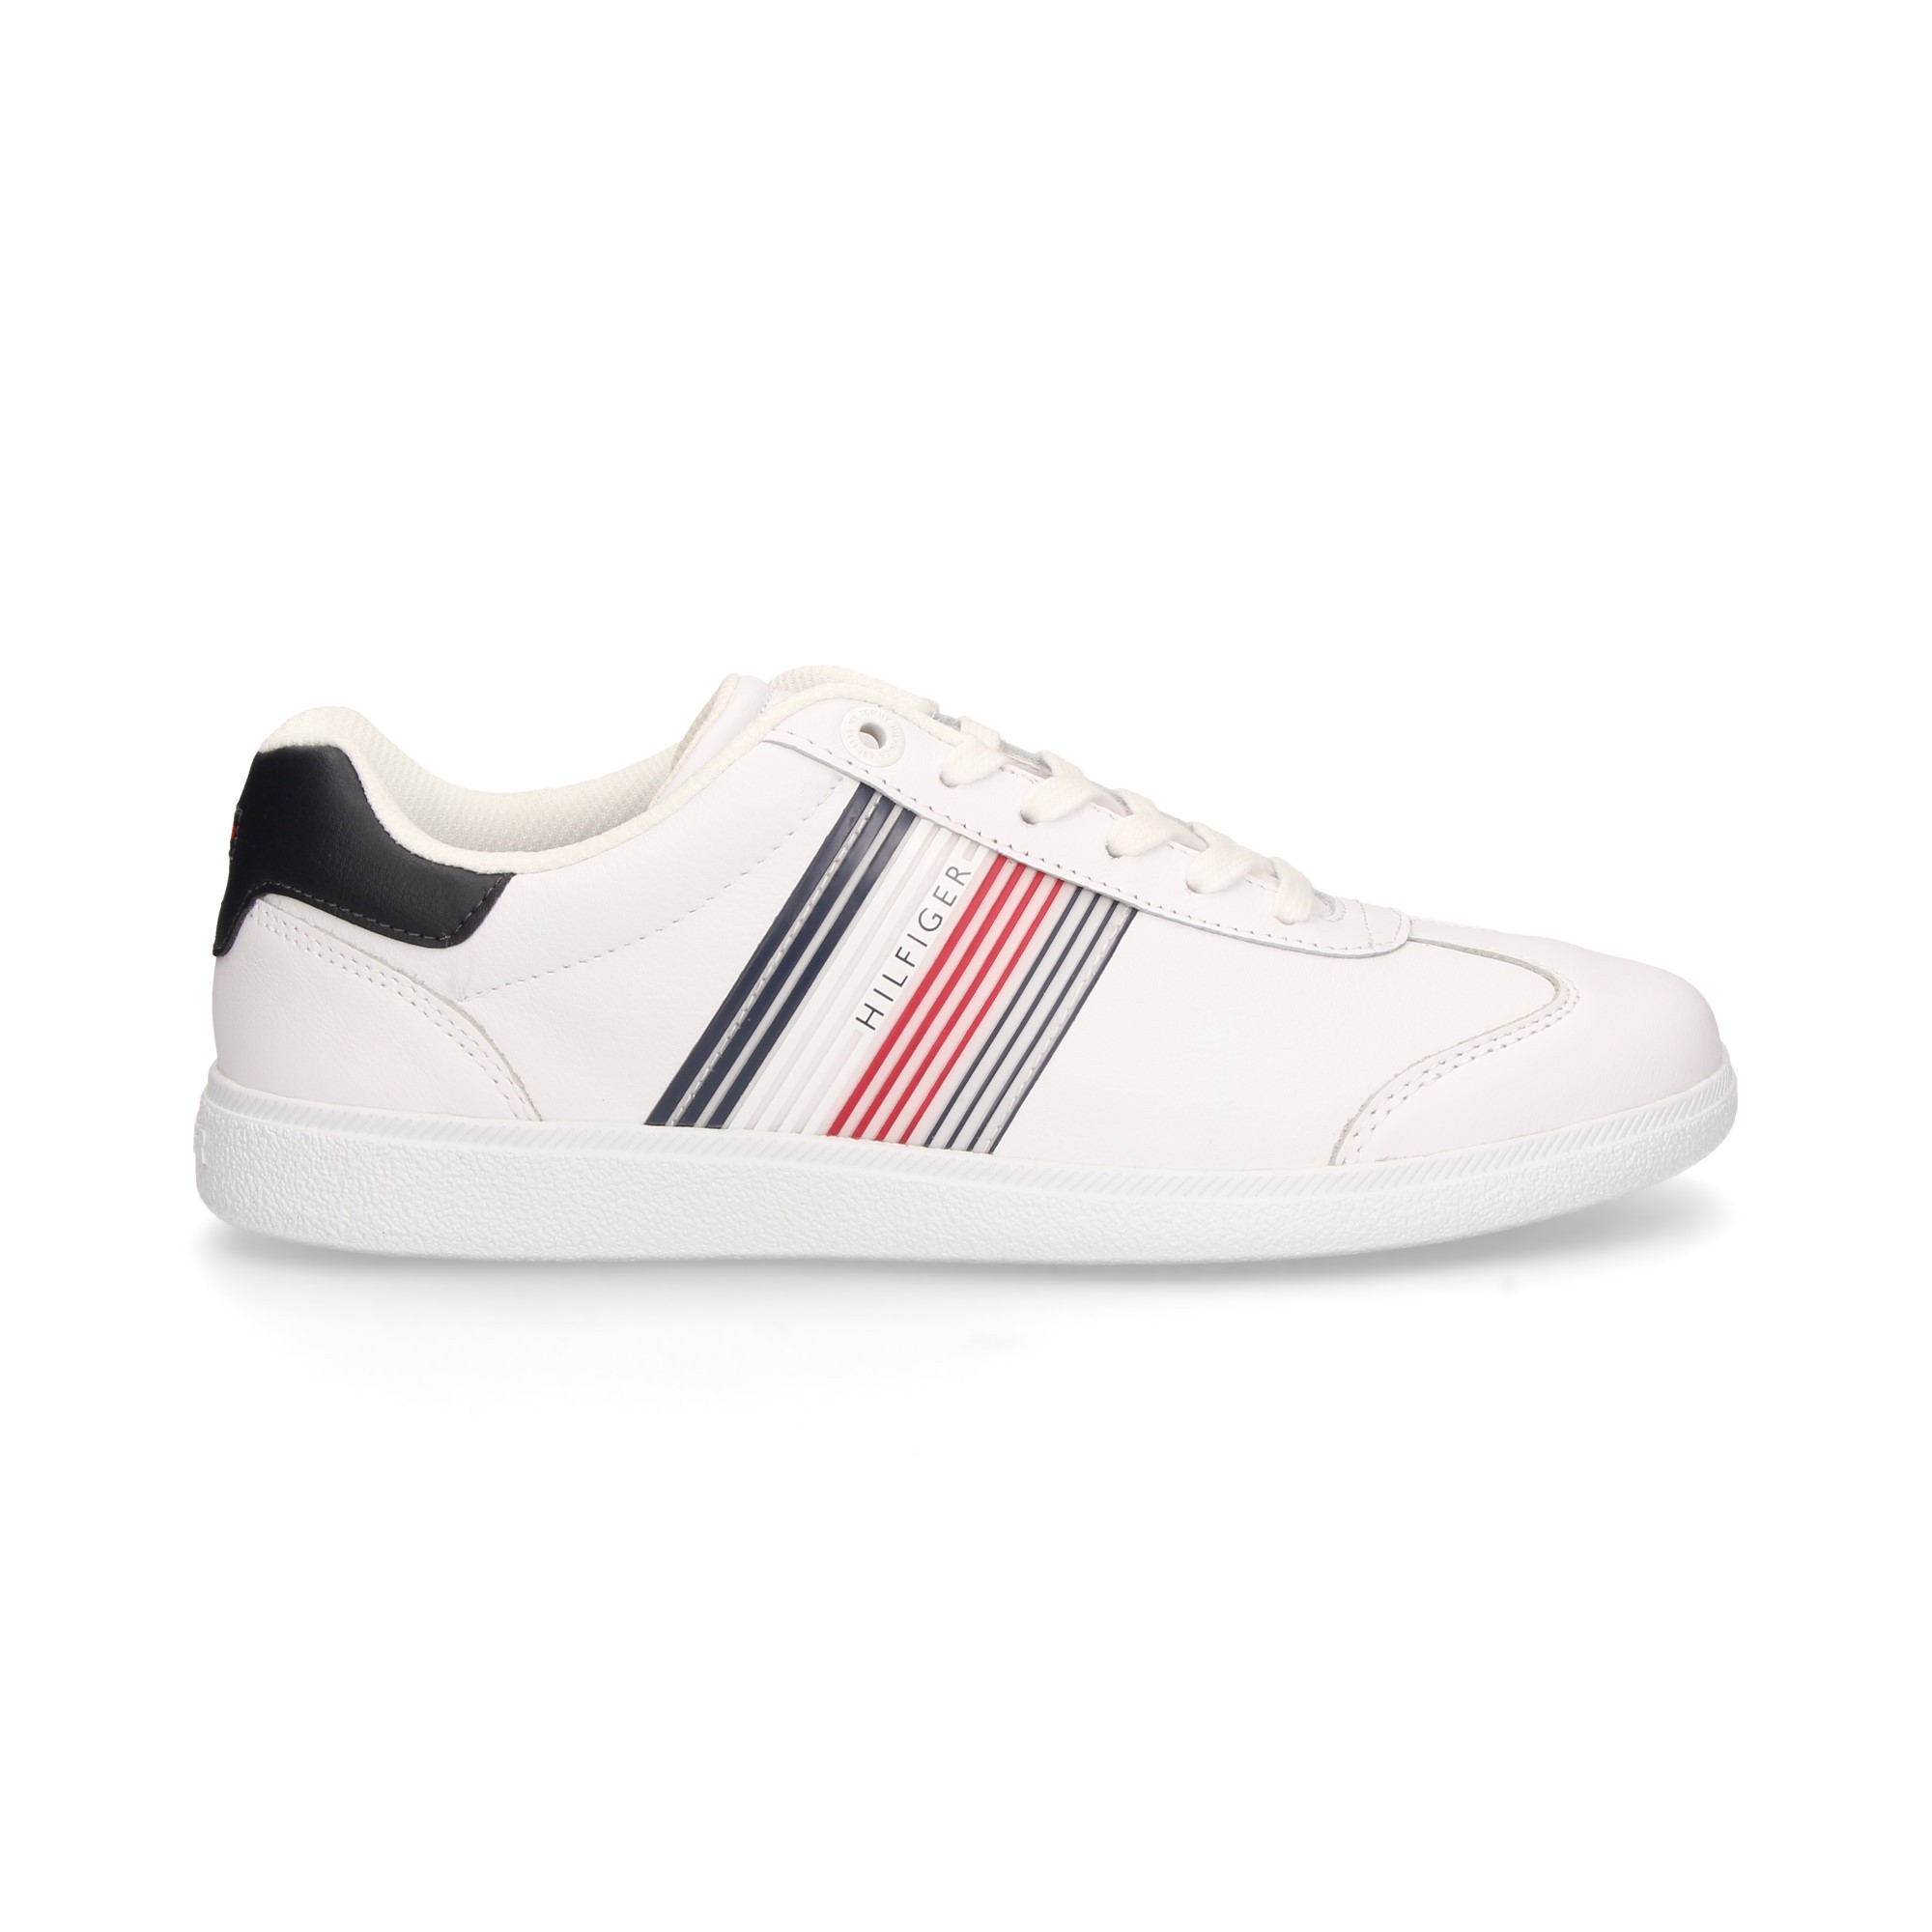 sporty-band-stripes-white-leather